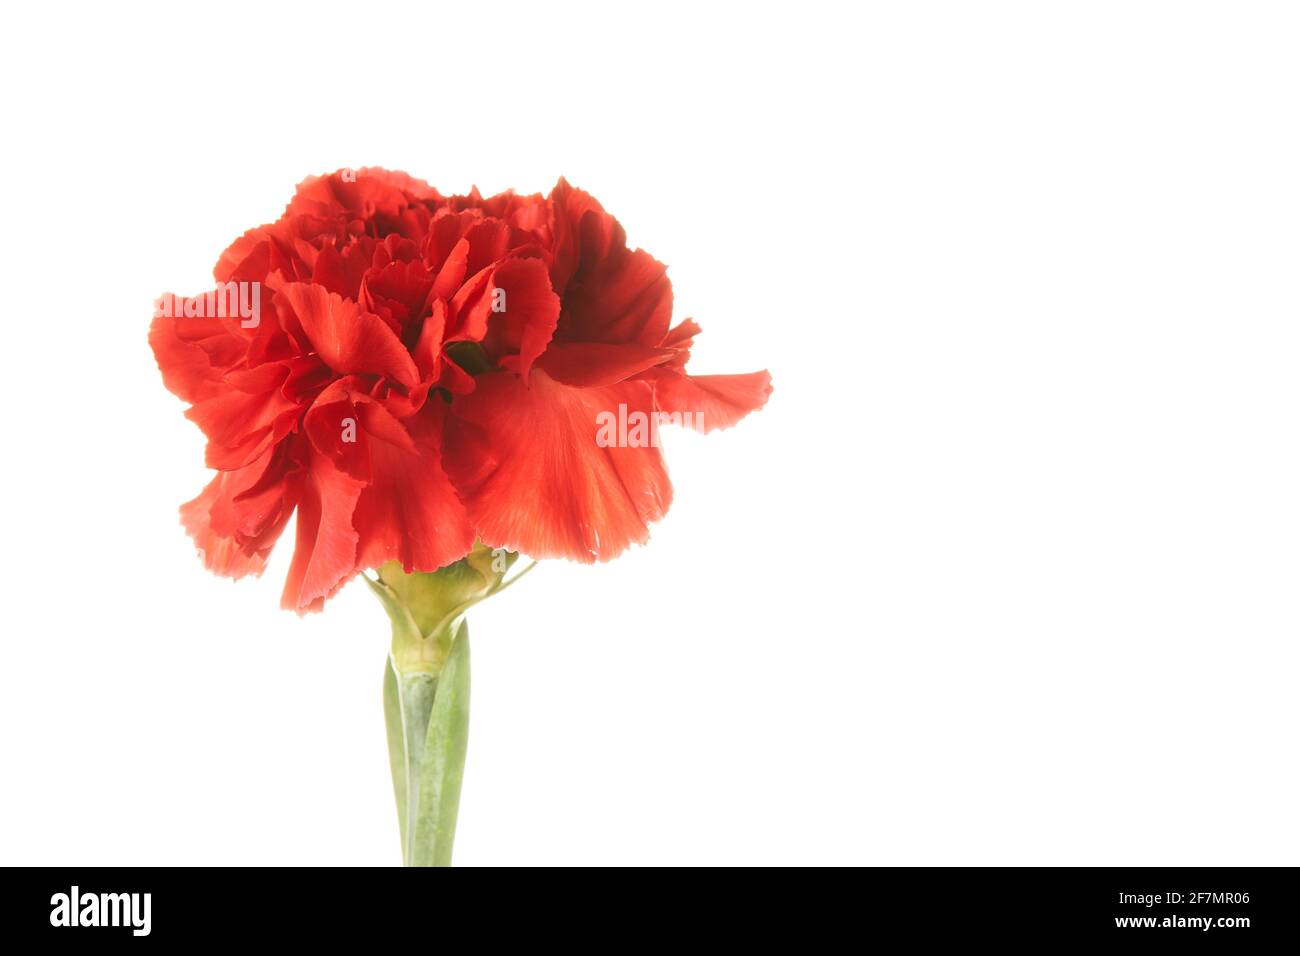 Beautiful red Dianthus flower on white background Stock Photo